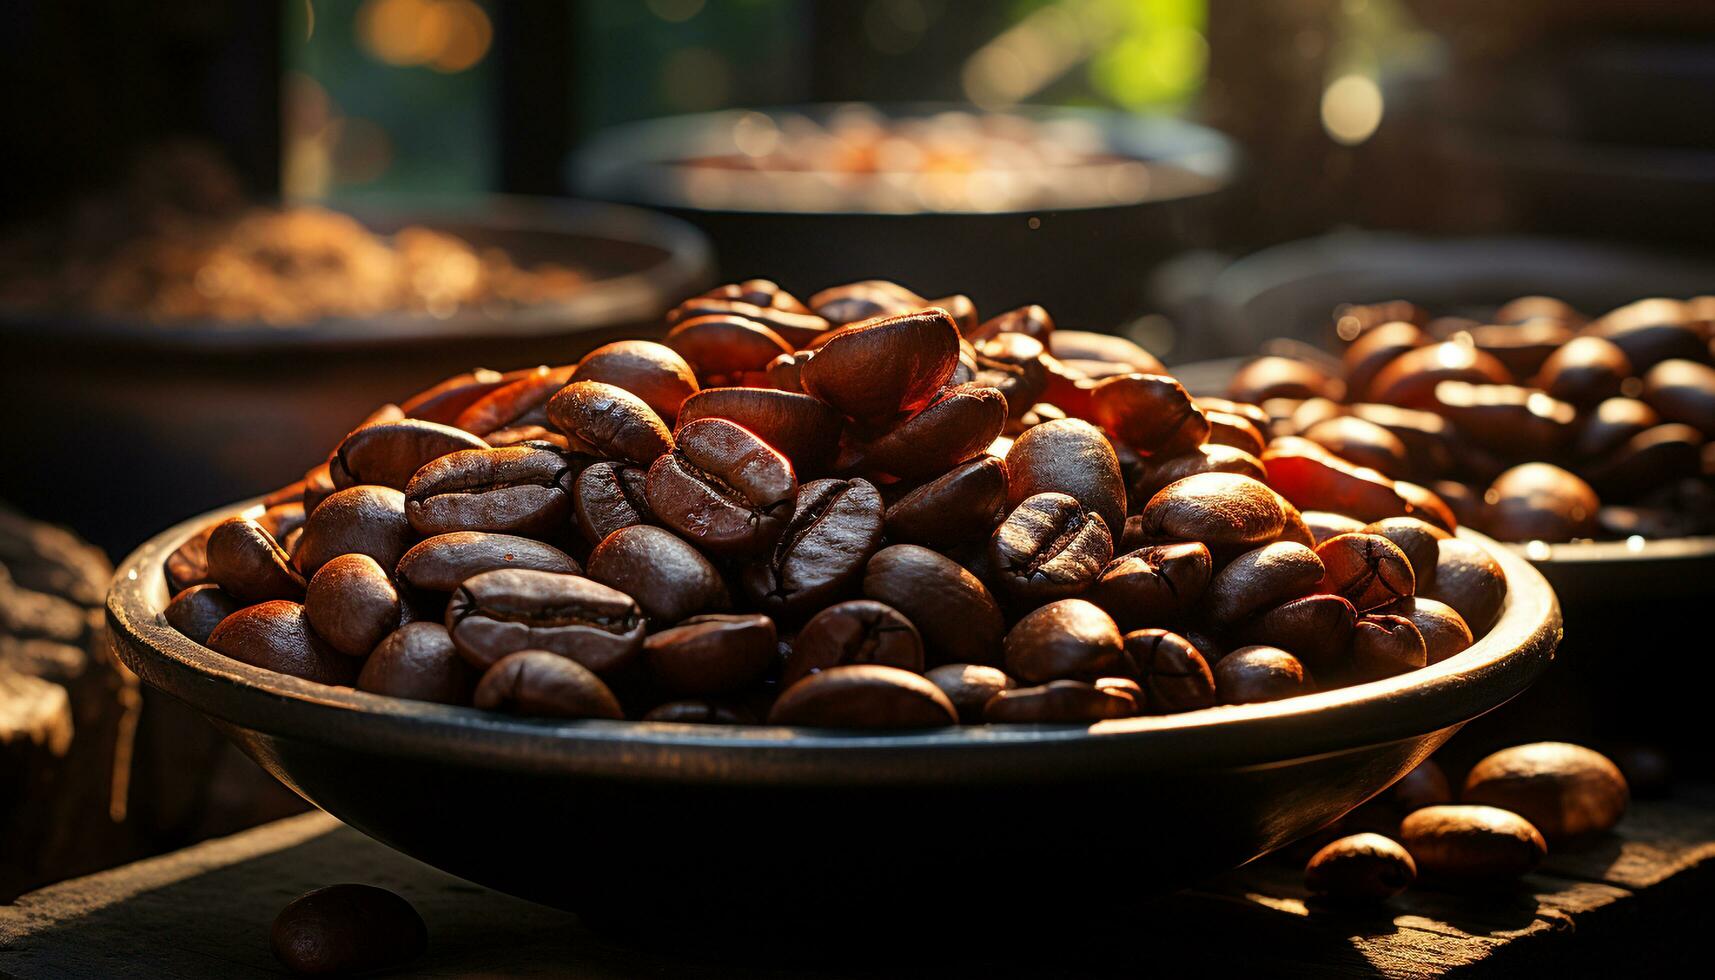 Freshness of nature in a bowl, organic beans on wooden table generated by AI photo